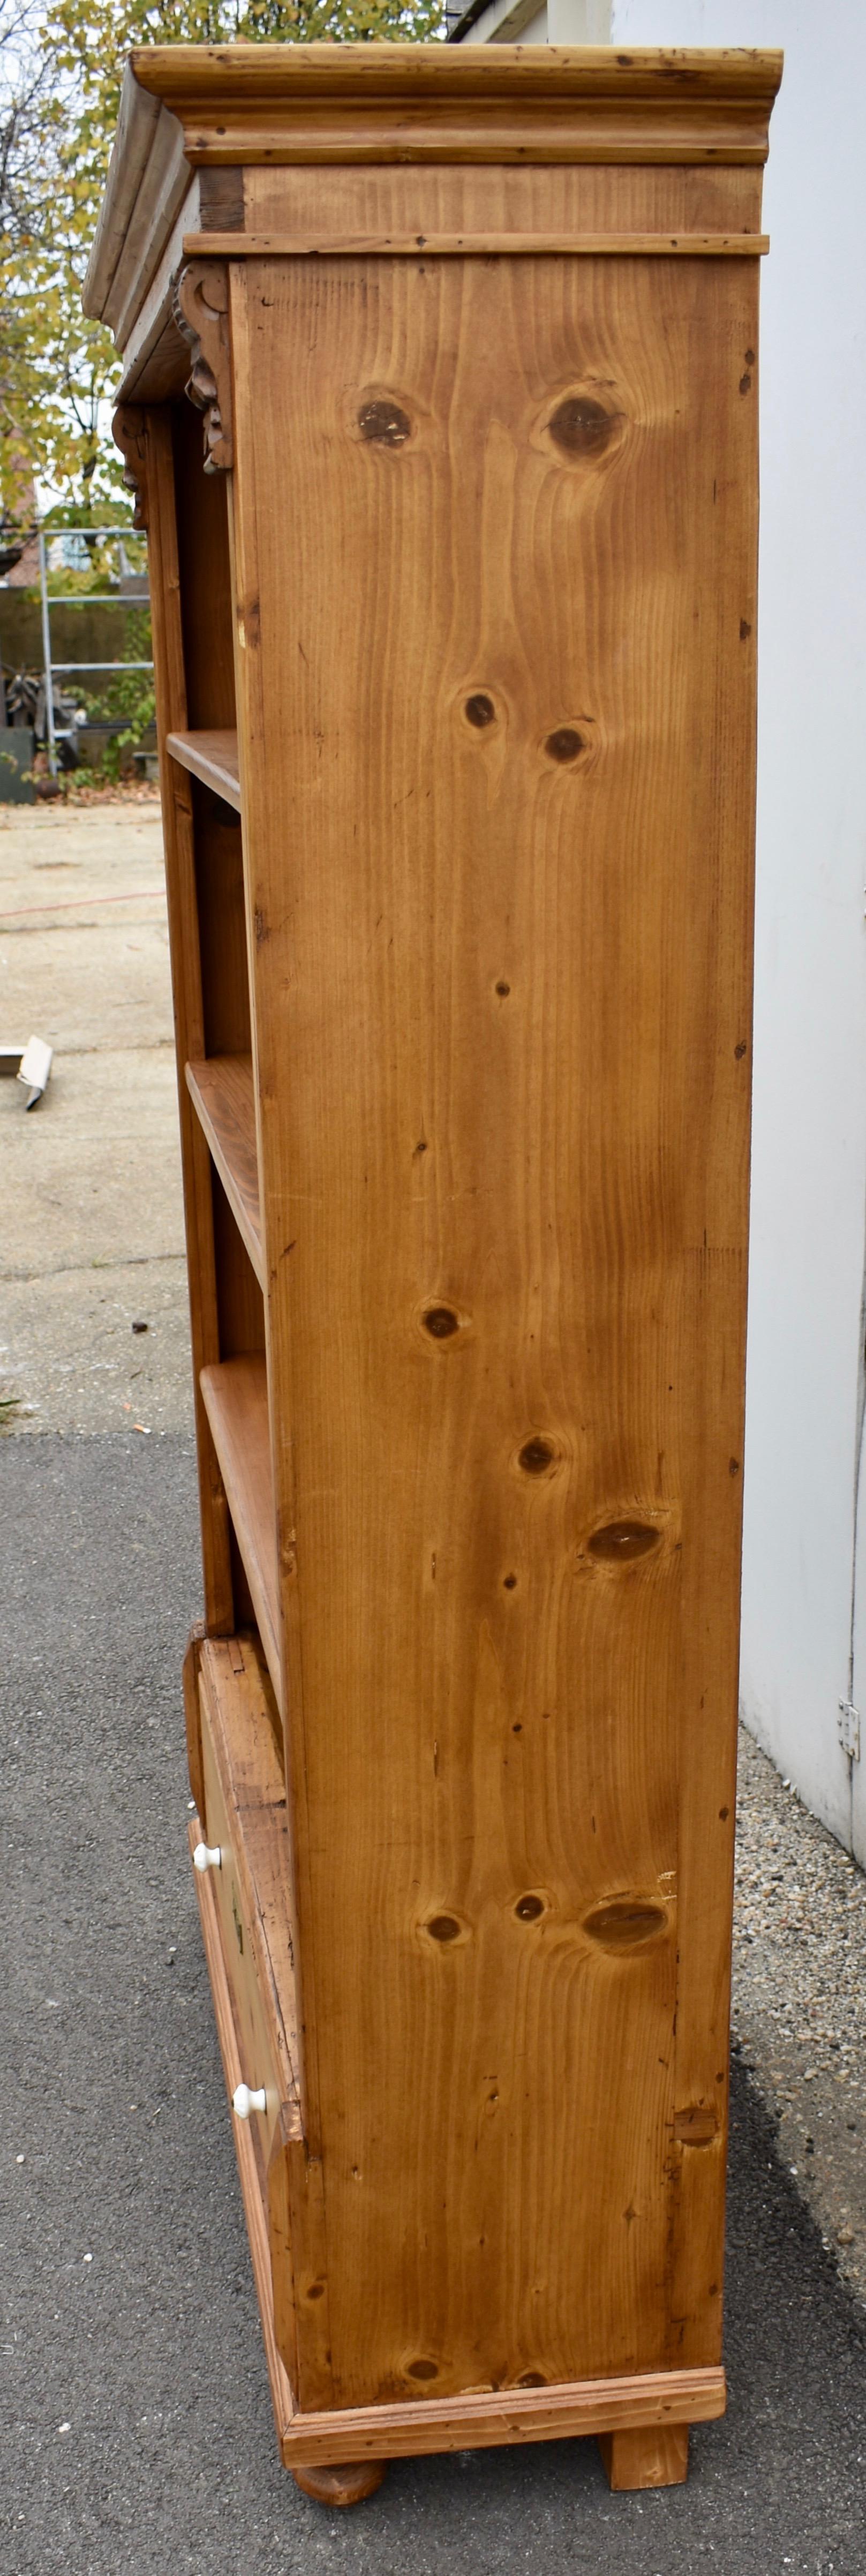 Polished Vintage Pine Open Bookcase from Armoire circa 1930 For Sale